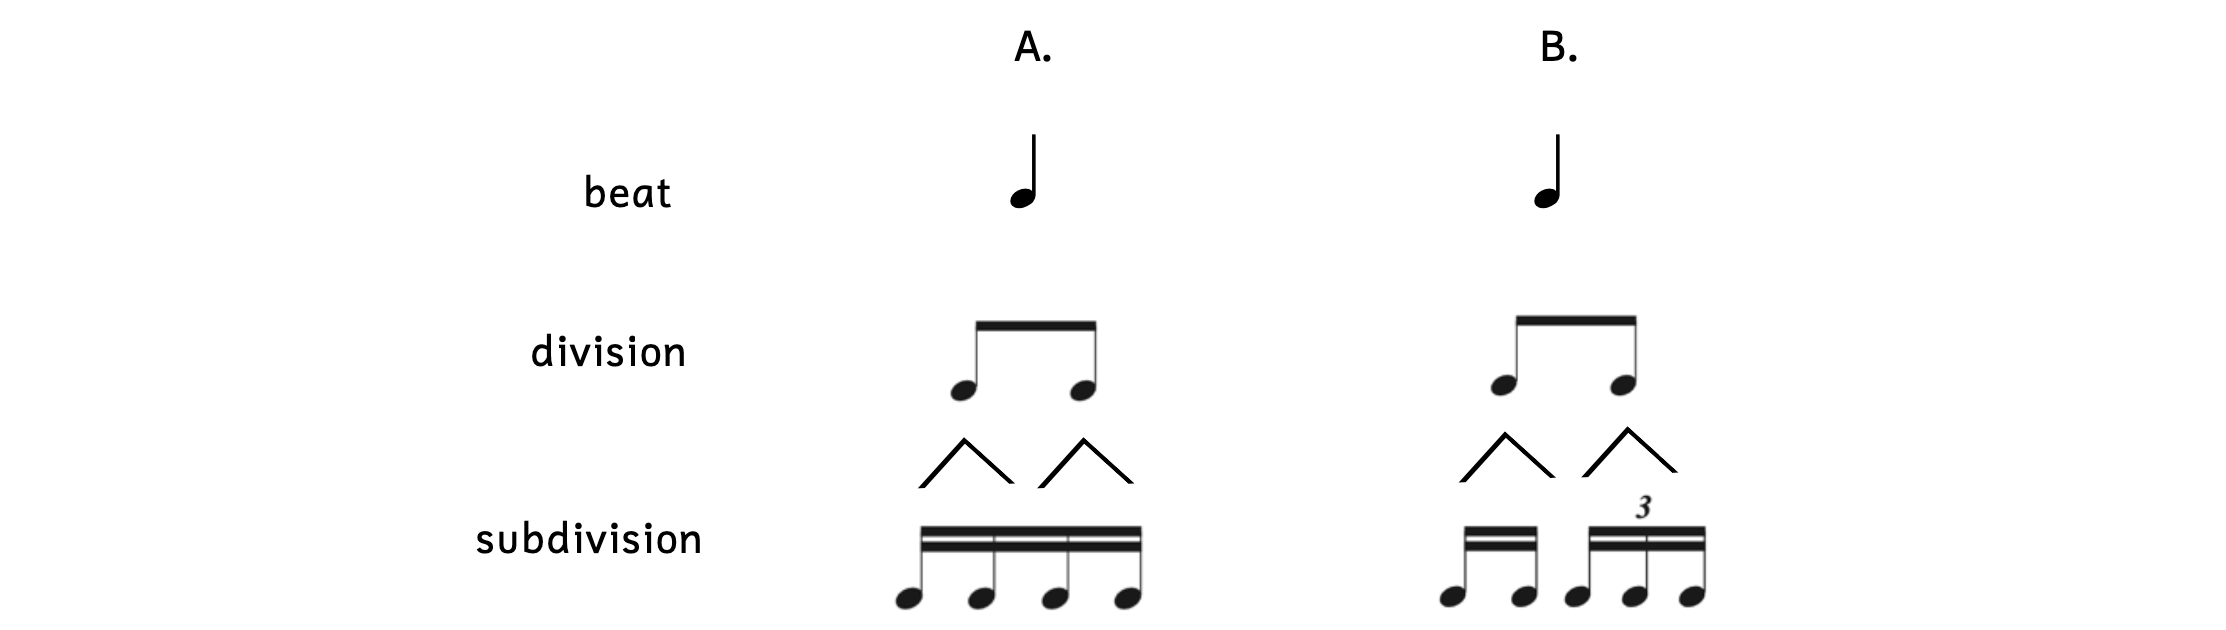 Triplets at the division level. Column A shows a quarter note beat, eighth note divisions, and sixteenth note subdivisions. In column B, the last two sixteenth note division are substituted with three sixteenth note triplets.